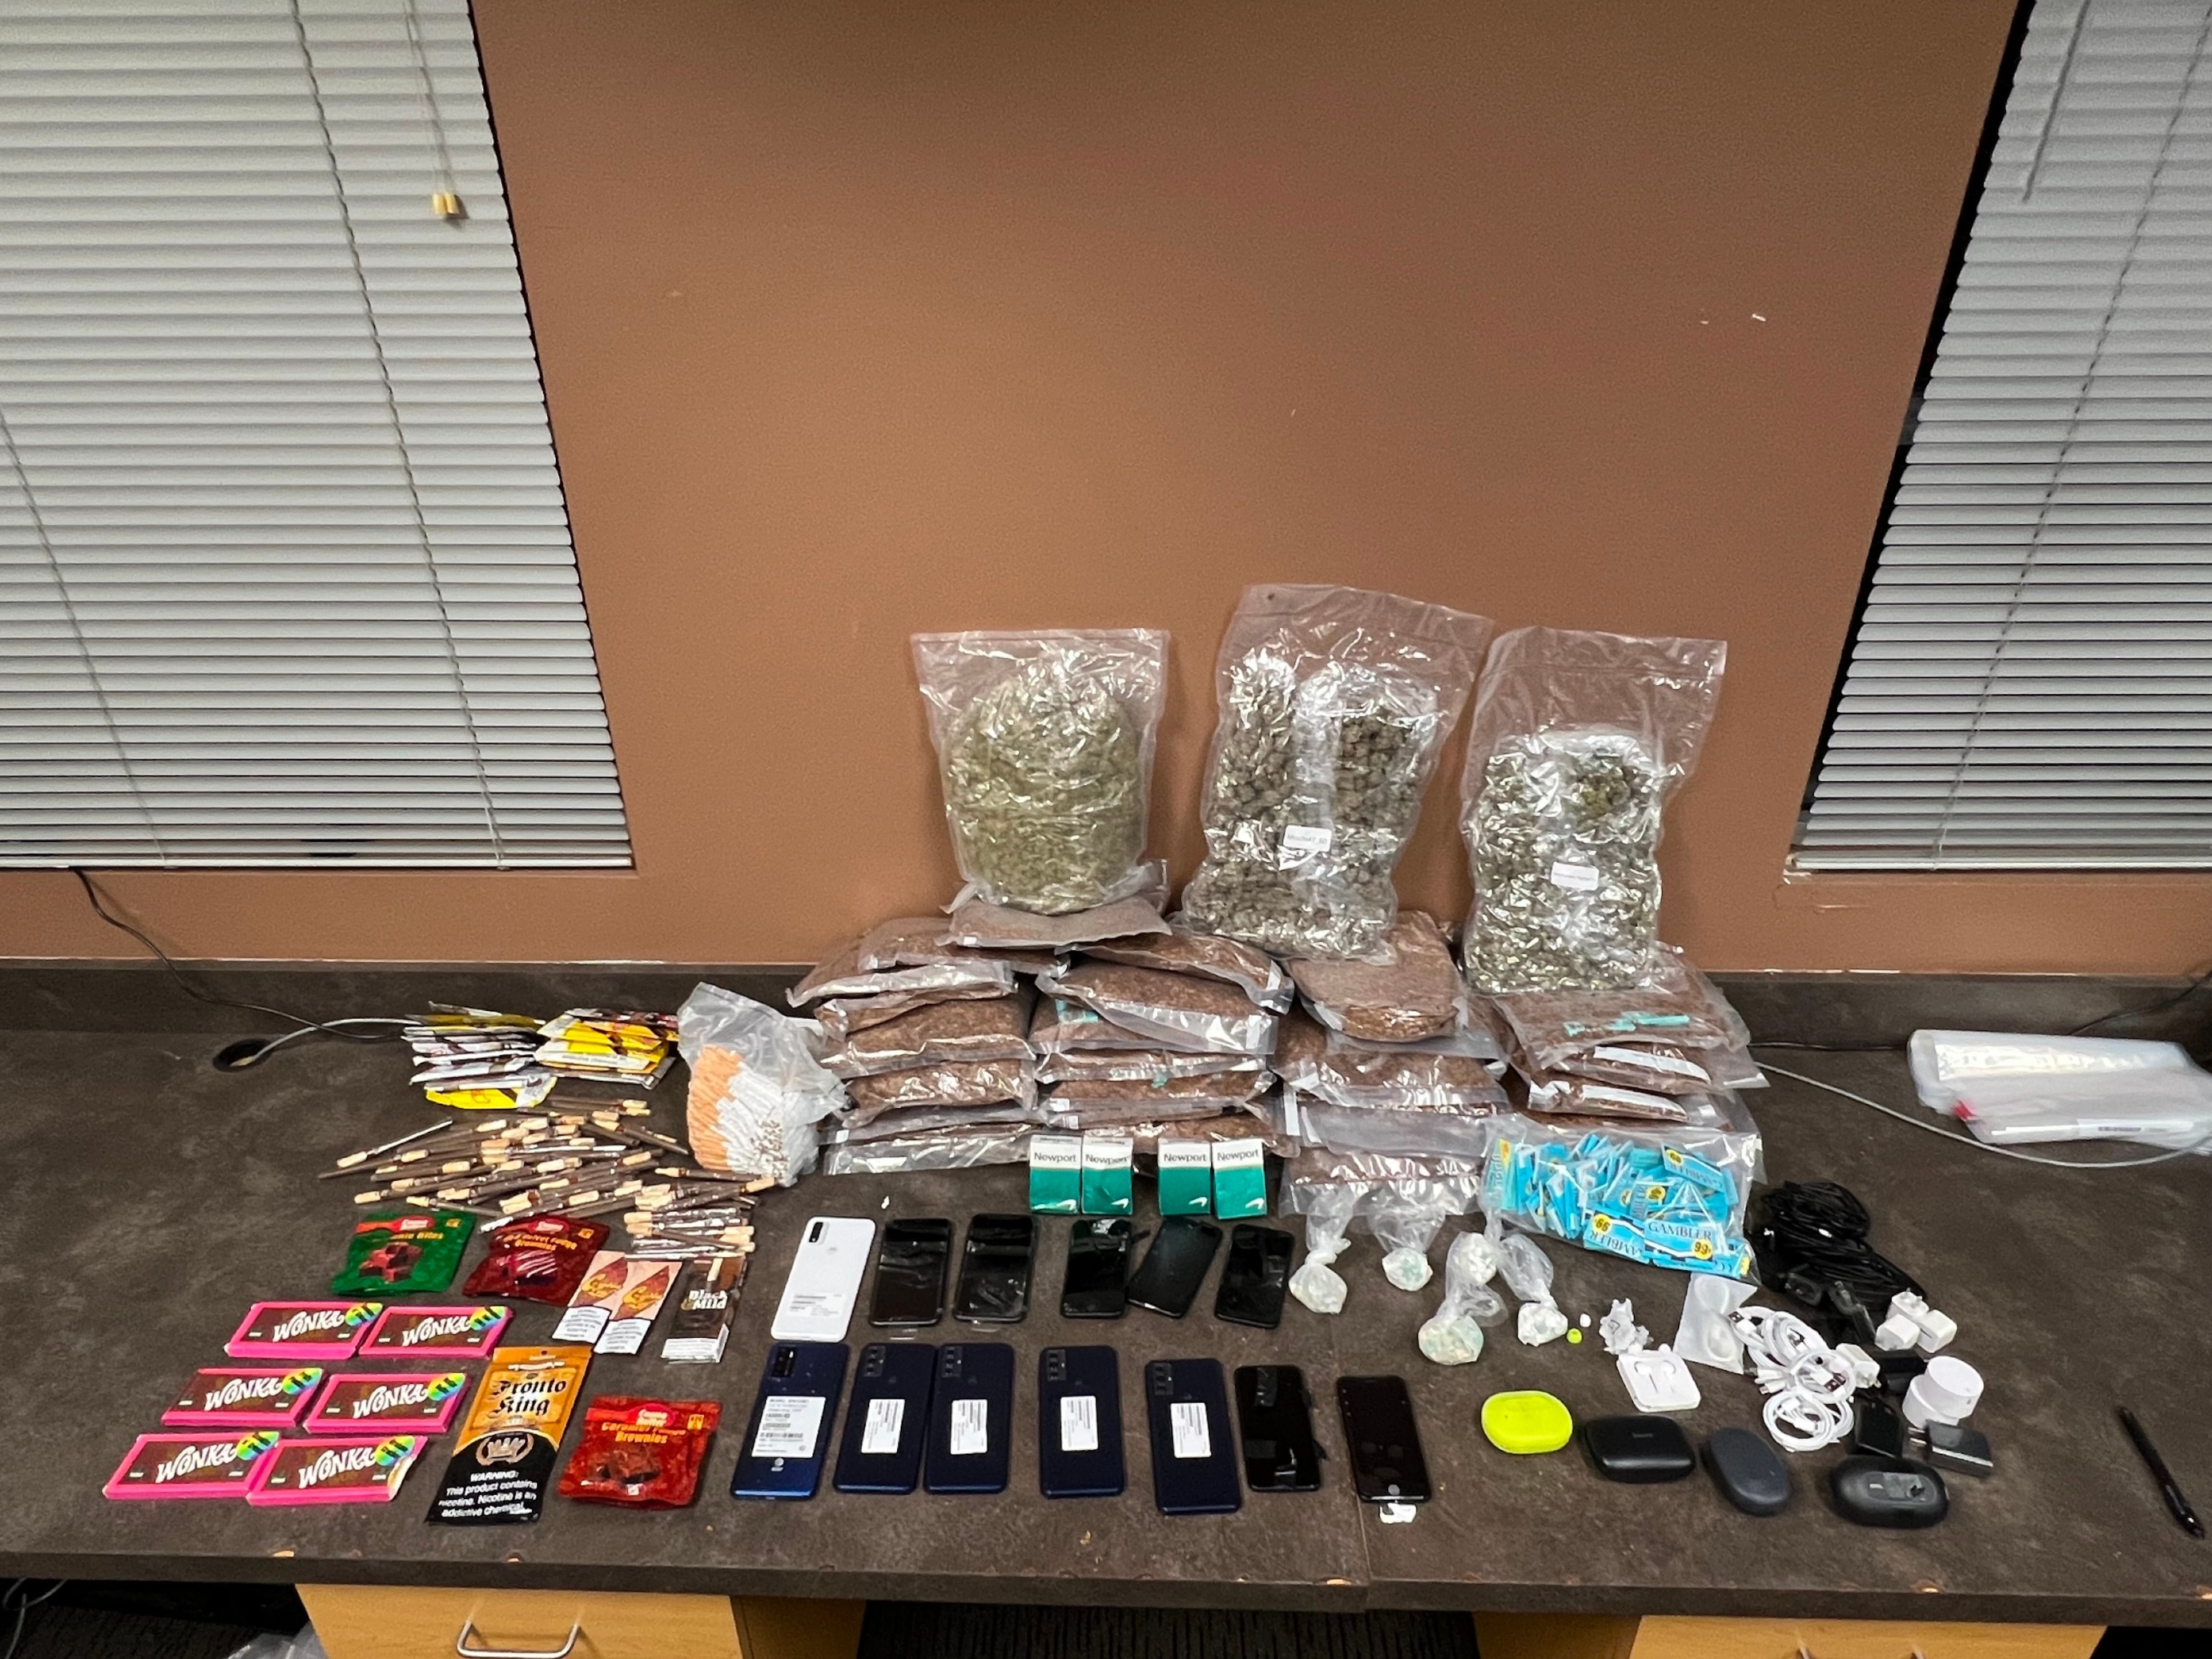 PHOTO: Items seized during an investigation into contraband are seen in a photo released by the Georgia Department of Corrections.